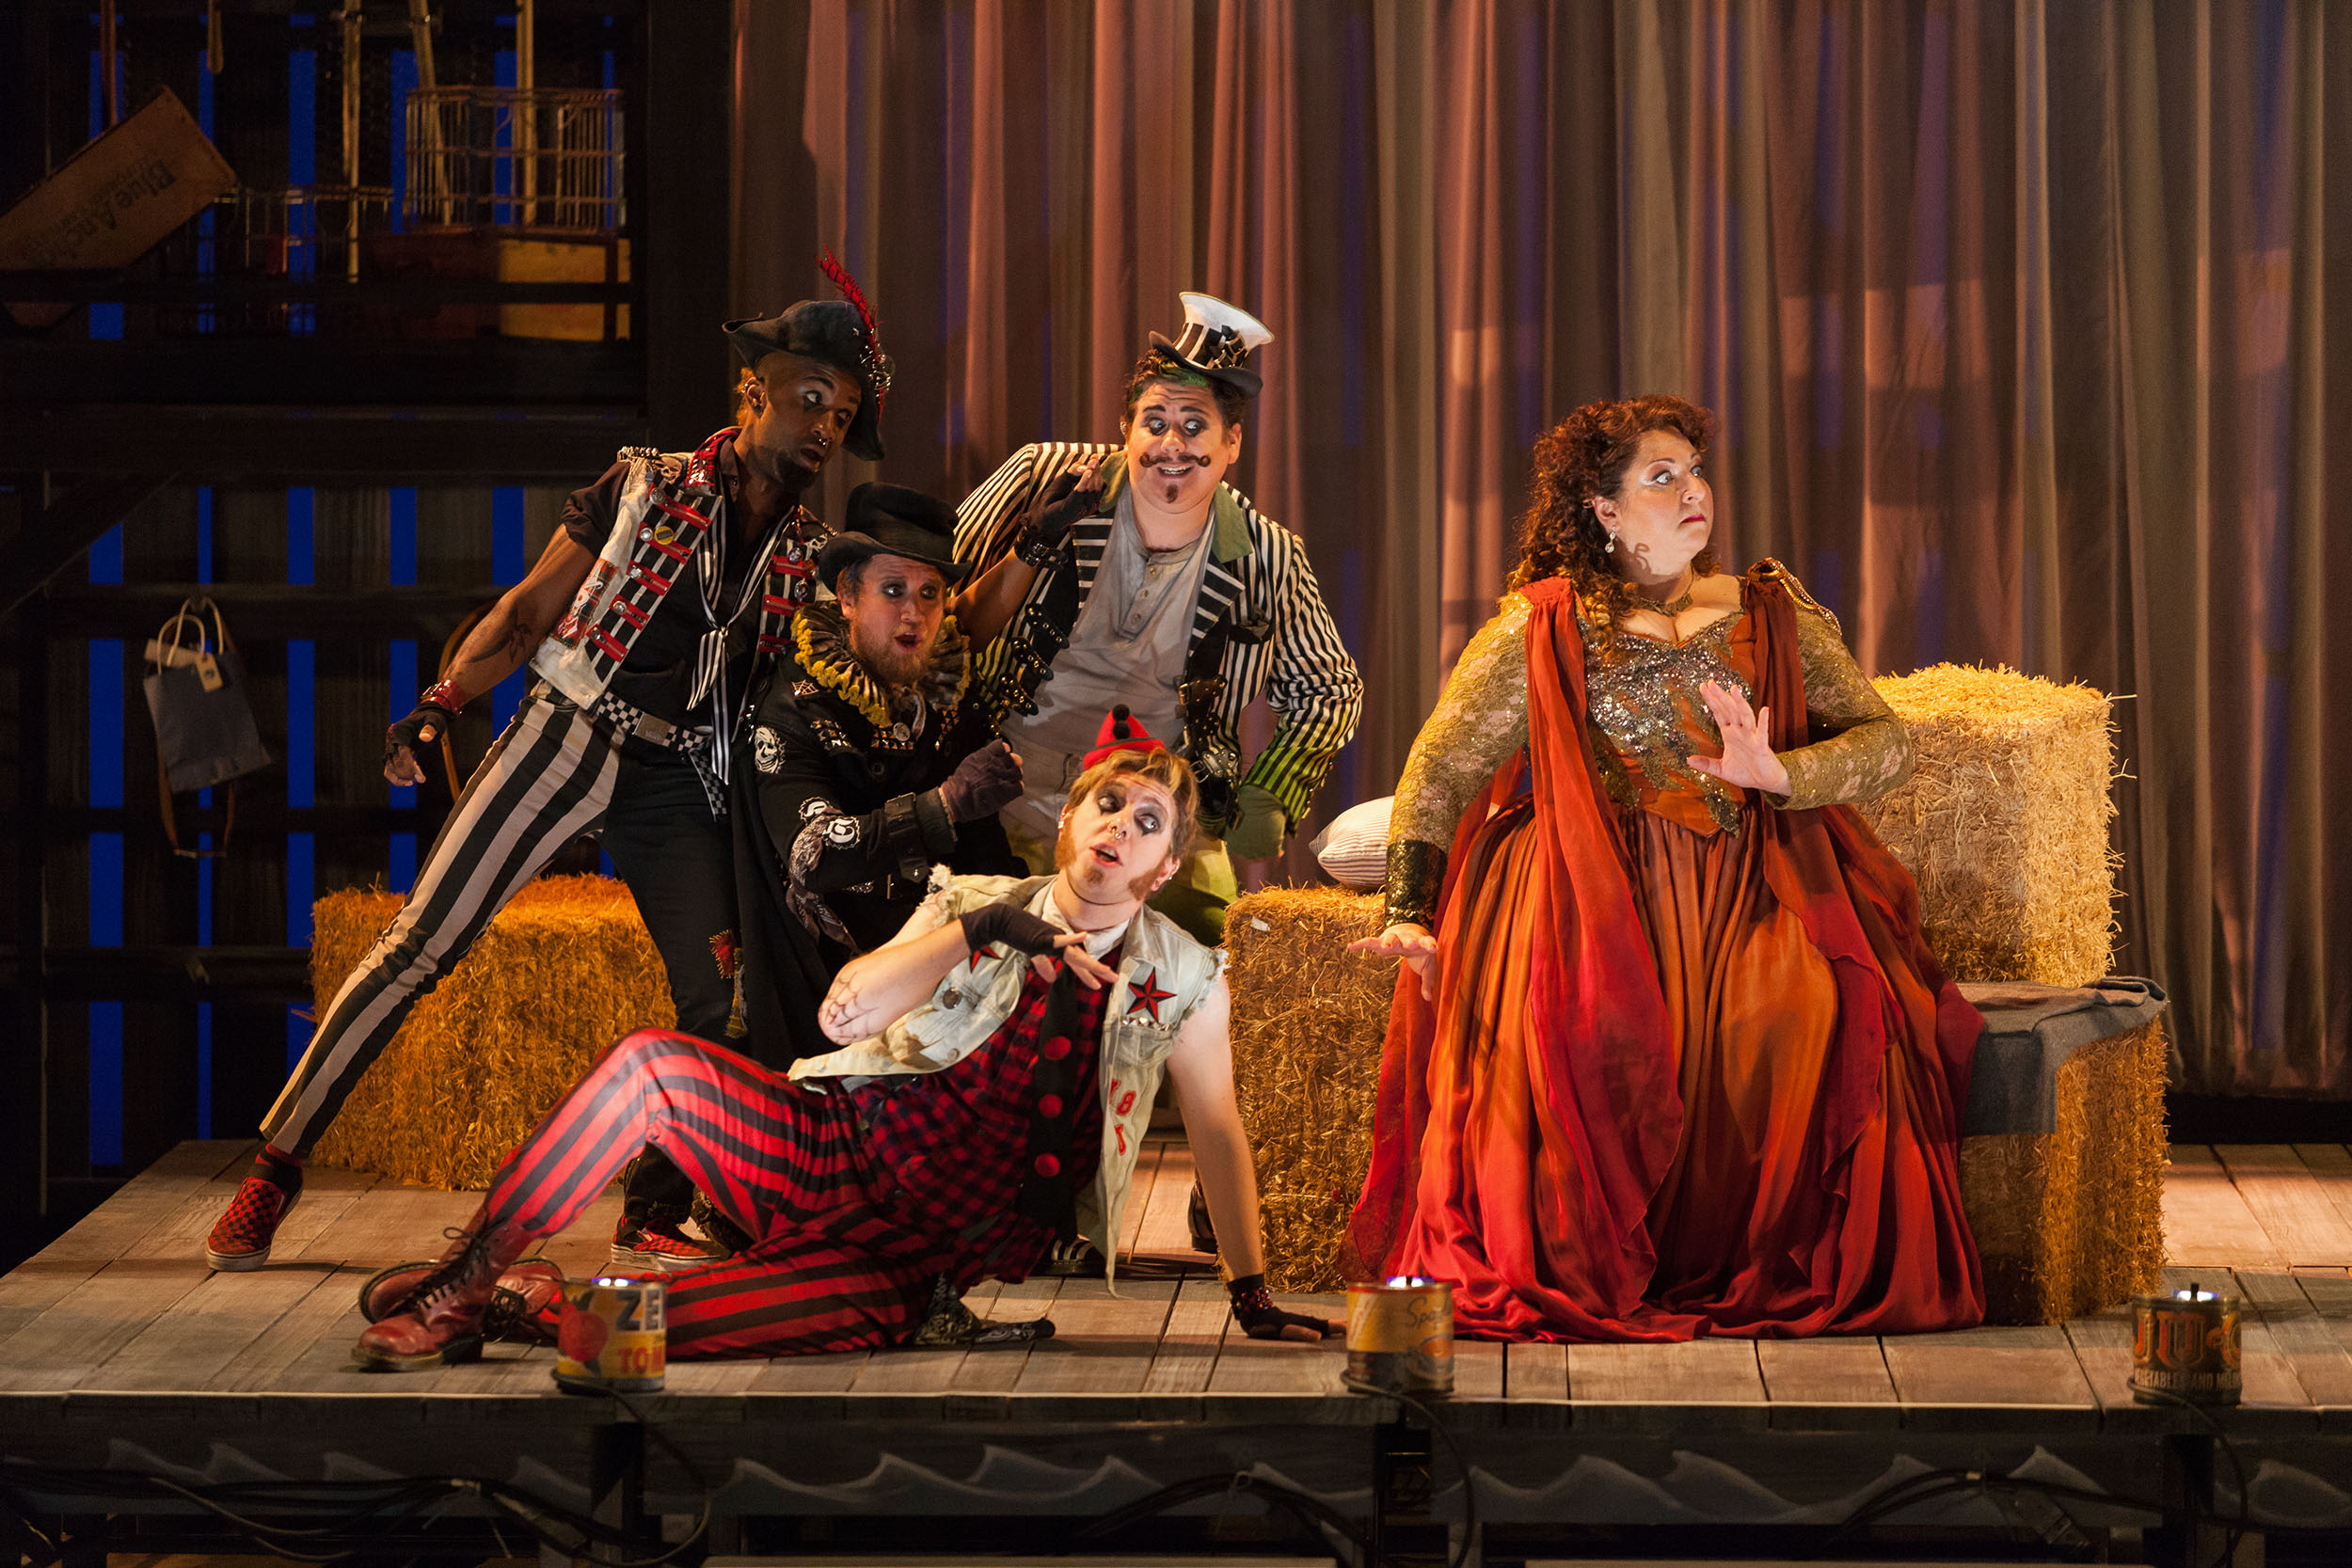  Clockwise from top: Brian Ross Yeakley as Brighella, Christine Goerke as Ariadne, Gerard Michael D'Emilio as Truffaldino, Andrew Penning as Scaramuccio and Carlton Ford as Harlequin in The Glimmerglass Festival's 2014 production of Strauss'  Ariadne